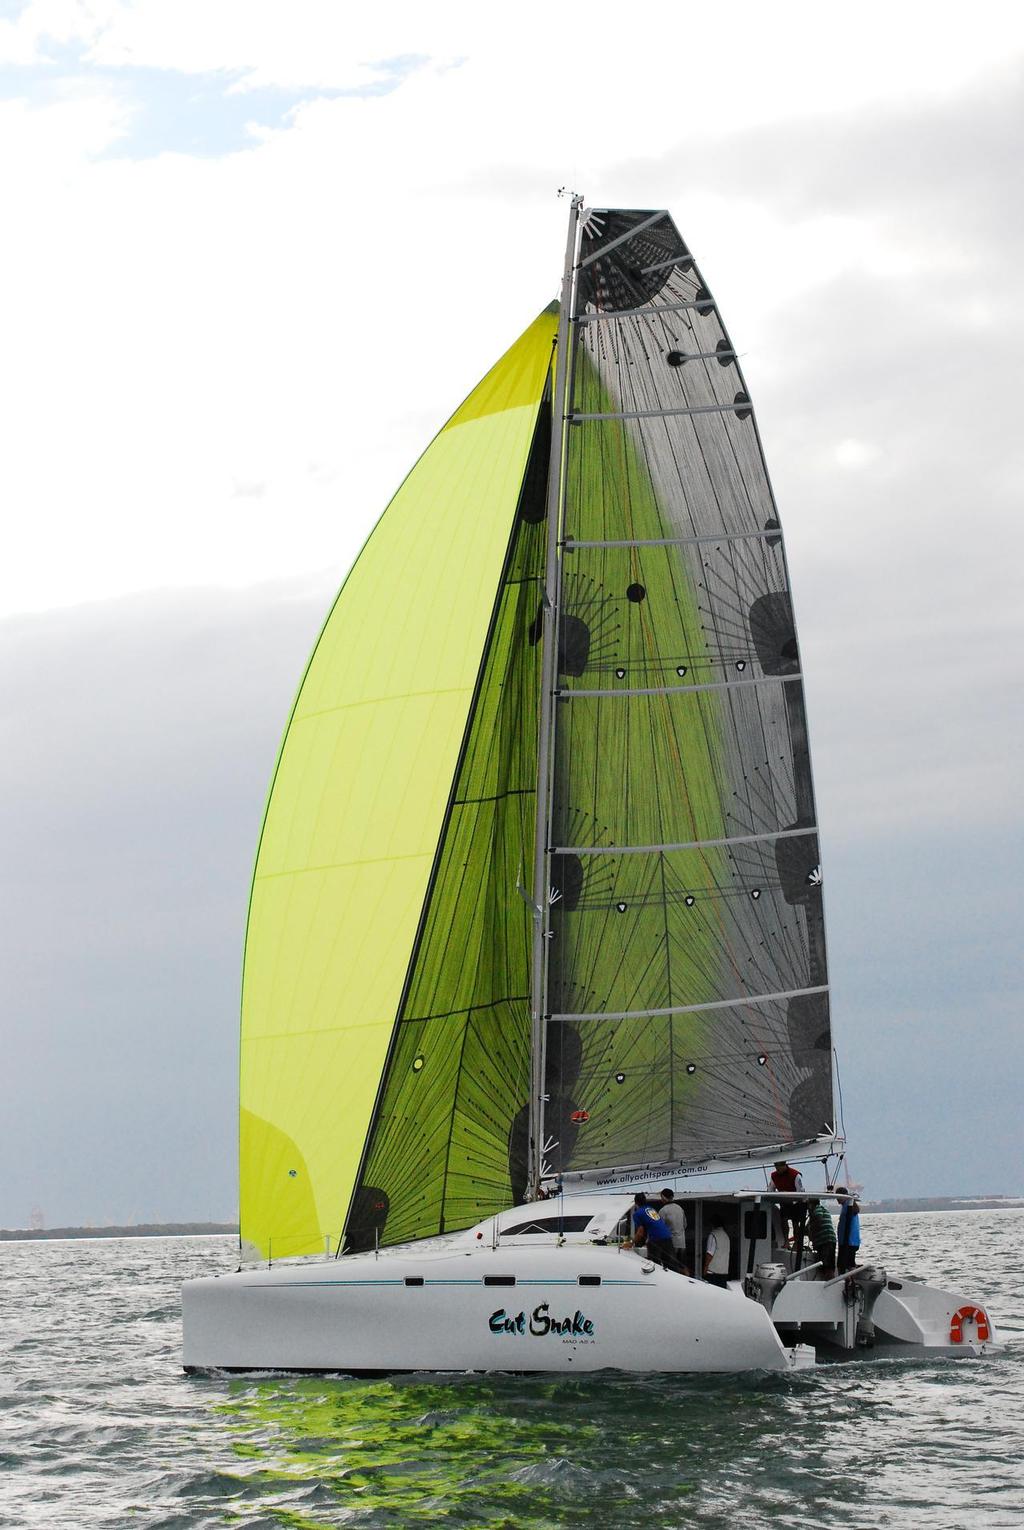 Cut Snake is ready to bite back - Allyacht Spars Brisbane to Gladstone Multihull Yacht Race © Peter Hackett